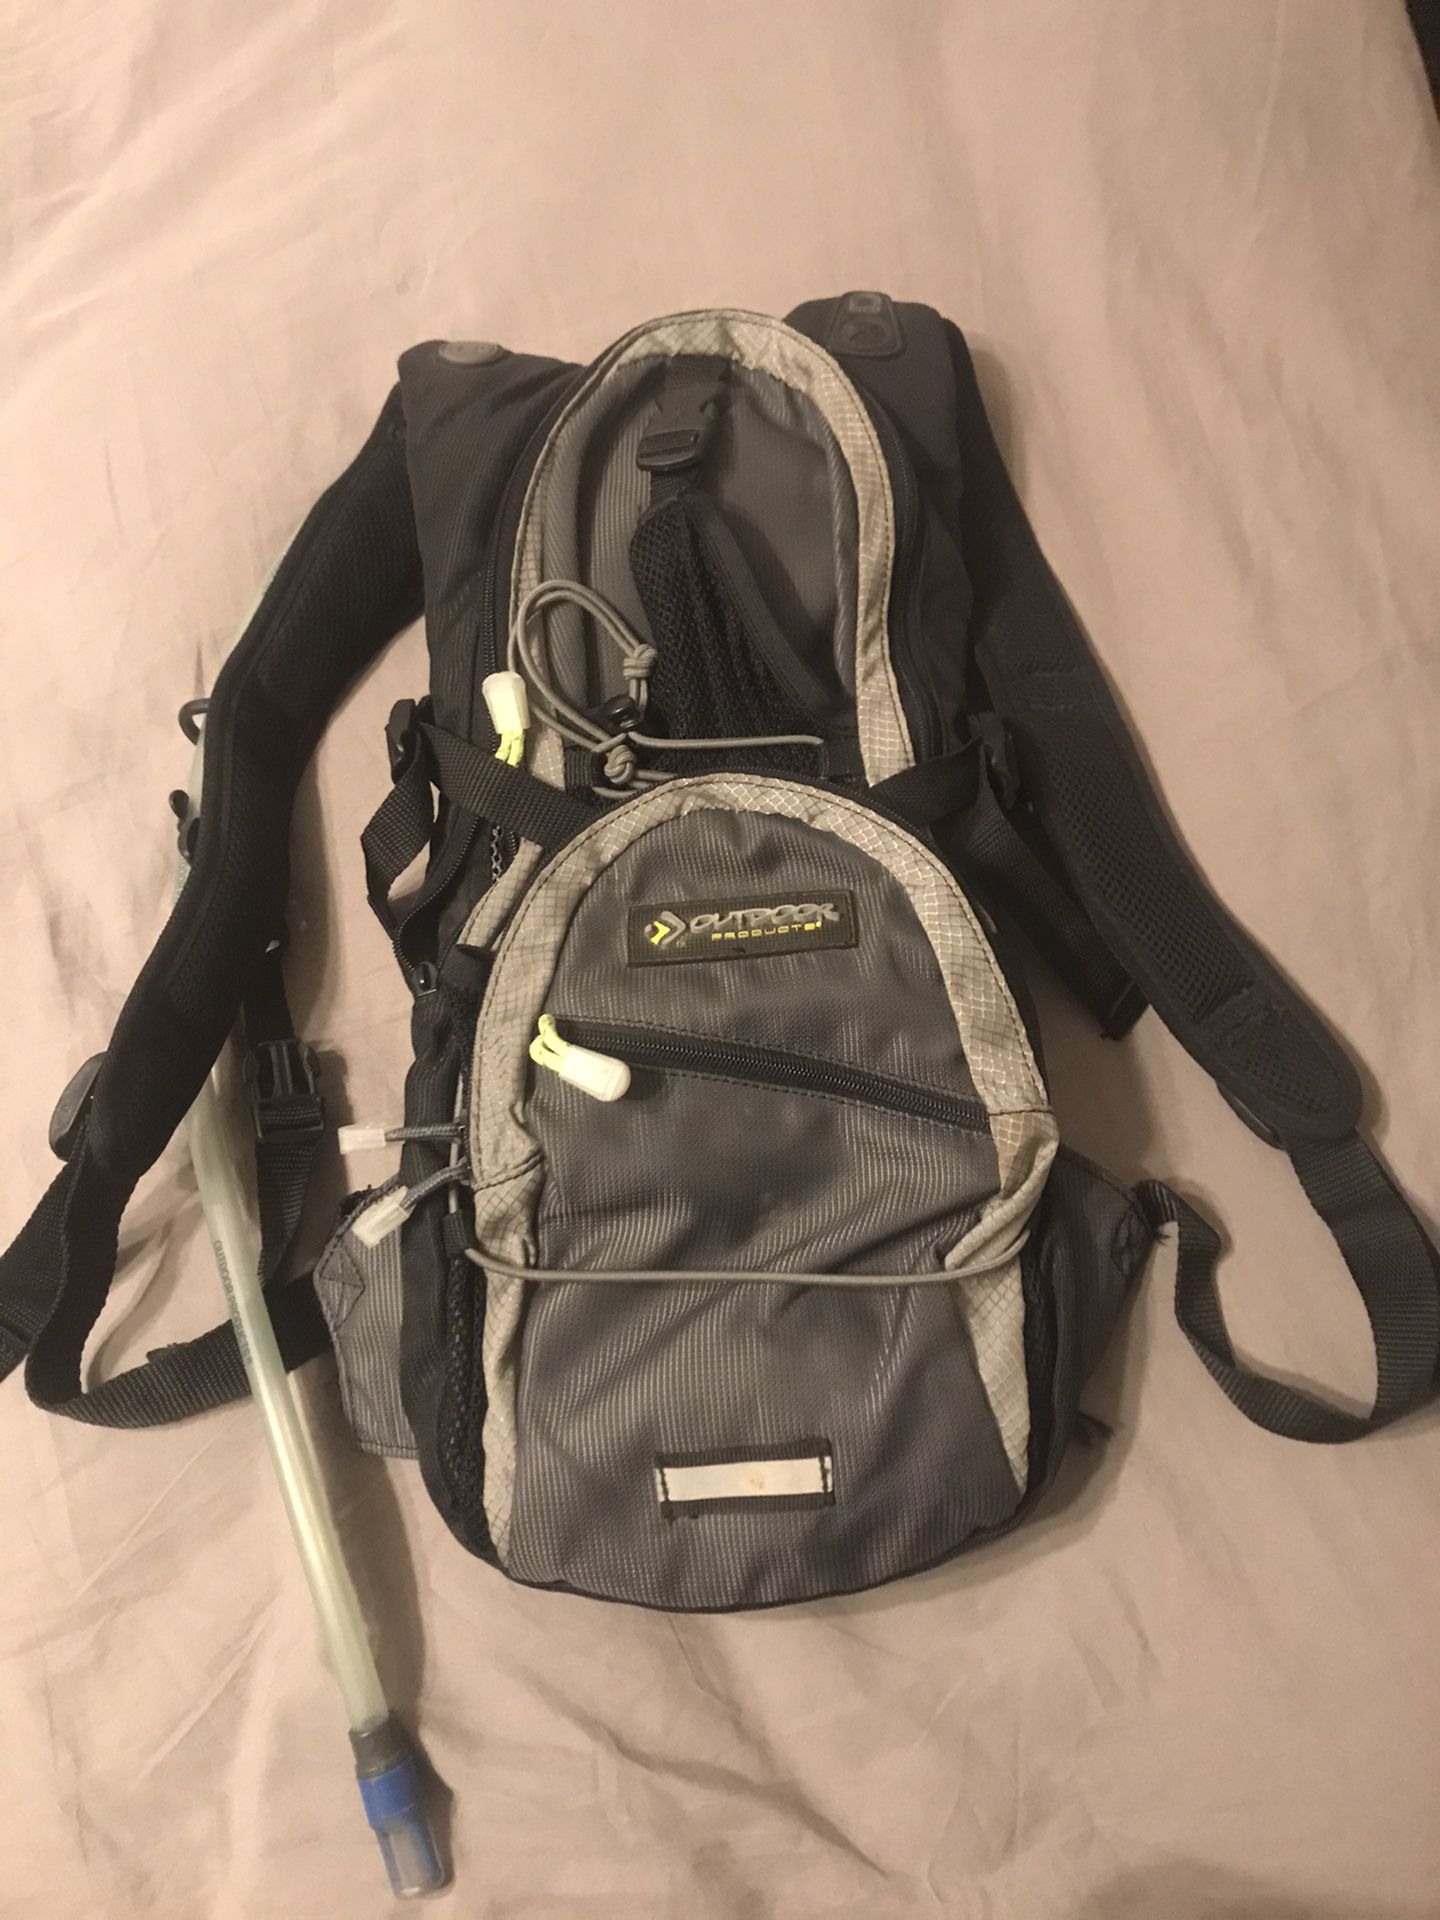 Hiking camping backpack with water bag